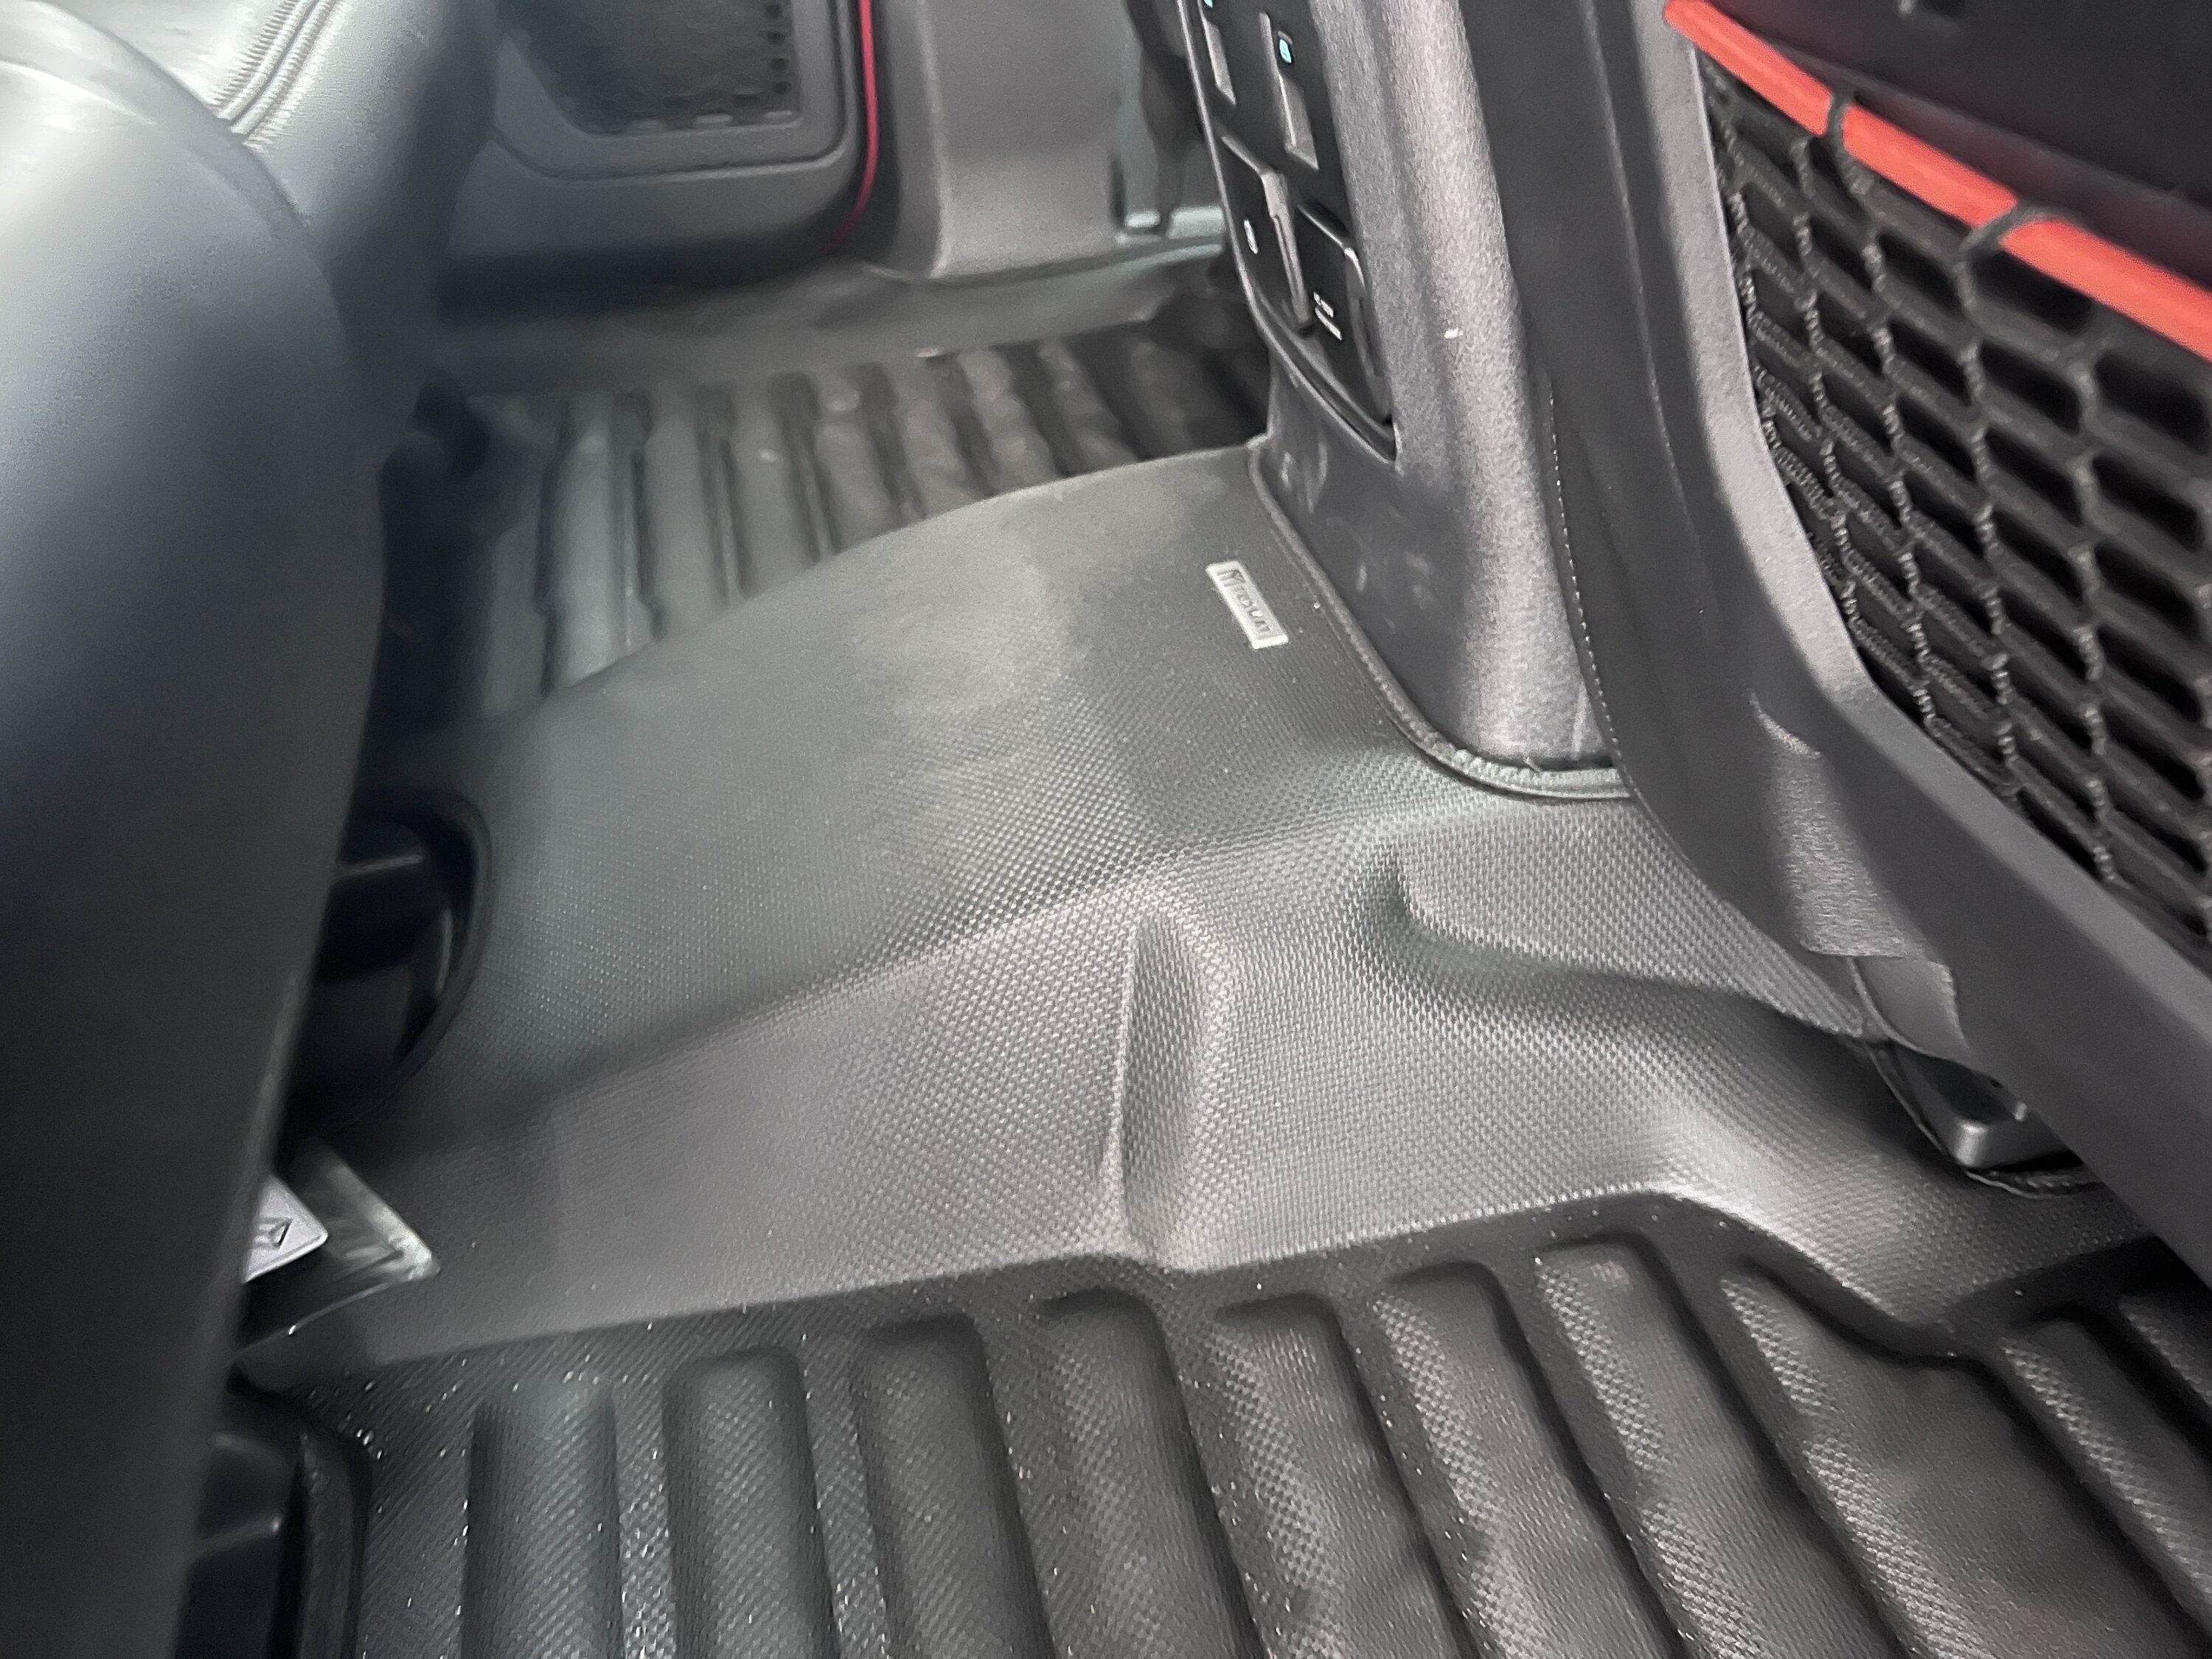 Ford Bronco TuxMat Floor Mats installed on my Bronco Raptor - These things are legit! 4E21BBEA-C00B-4A05-A28B-FF0EA382AF36